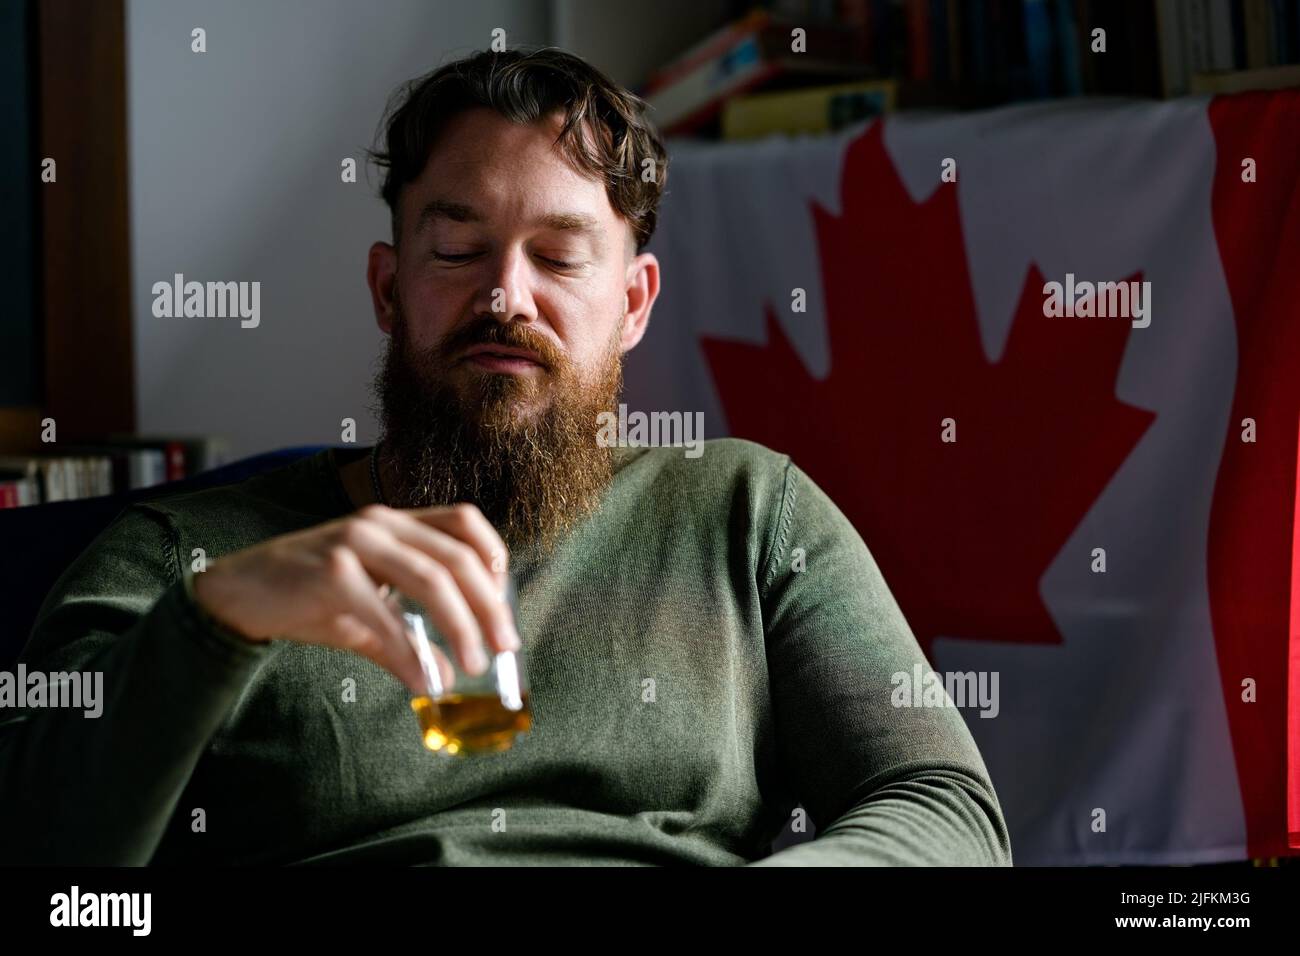 Dark tonal close up portrait of a young stylish handsome bearded Canadian man enjoying whiskey in a room with a Canadian flag behind him. Stock Photo